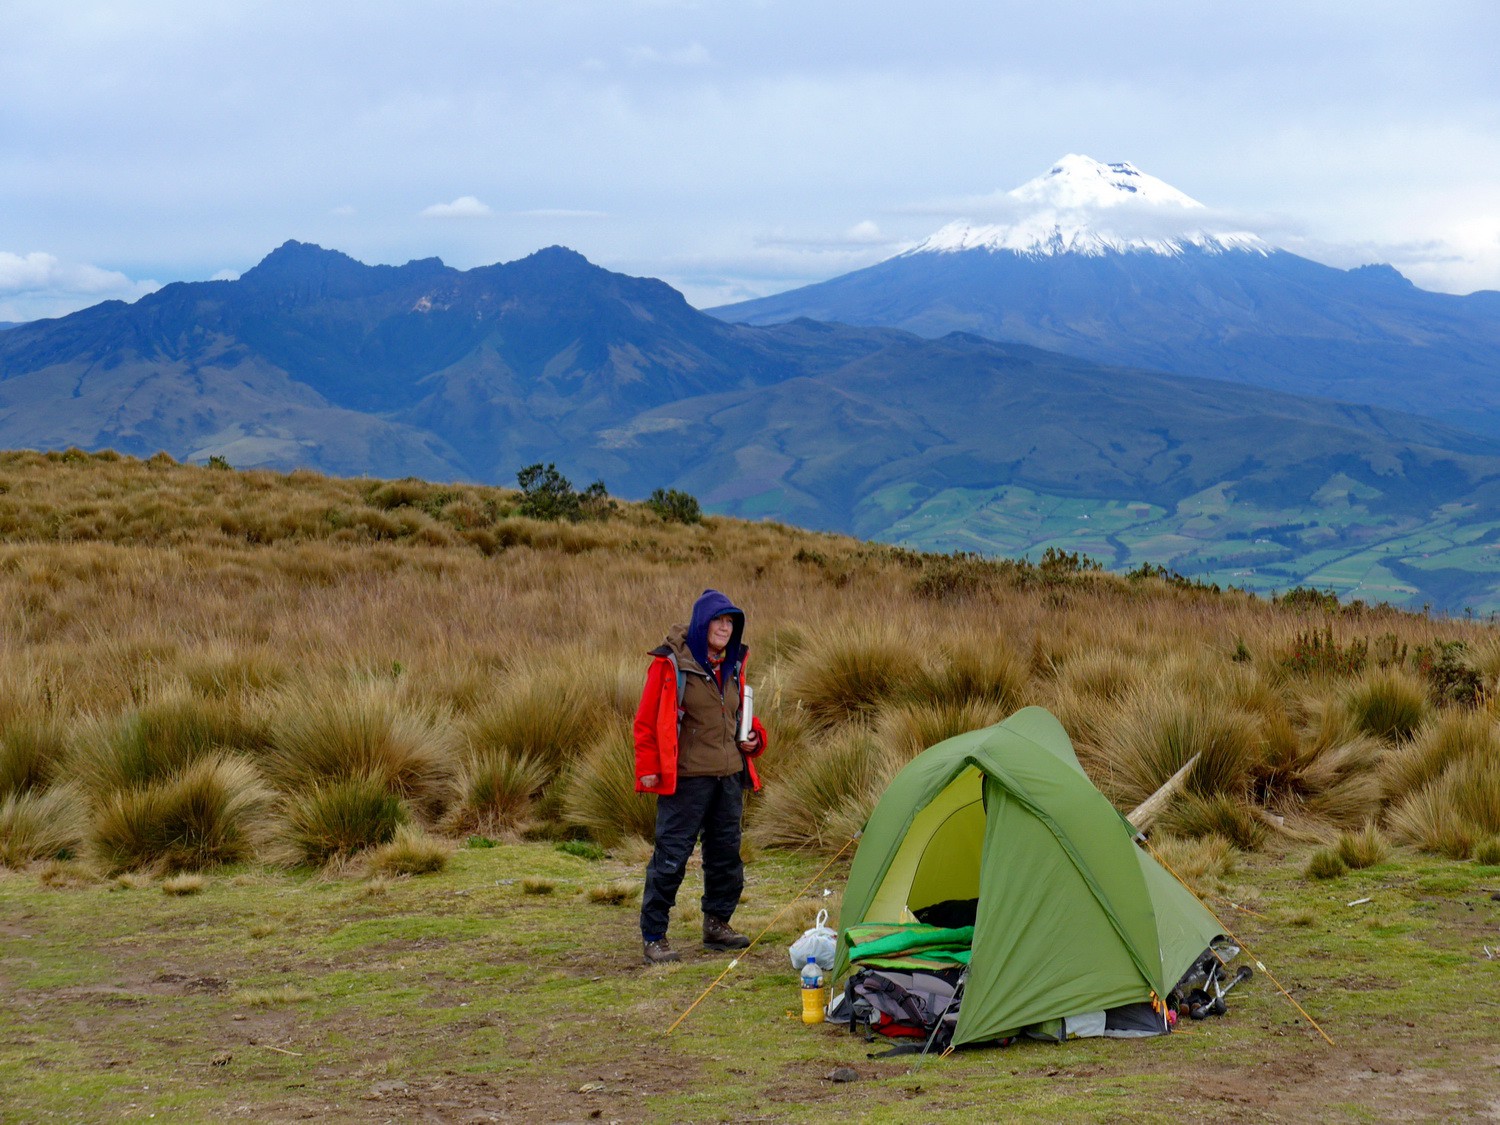 Our little tent with Volcan Rumiñahui and Cotopaxi